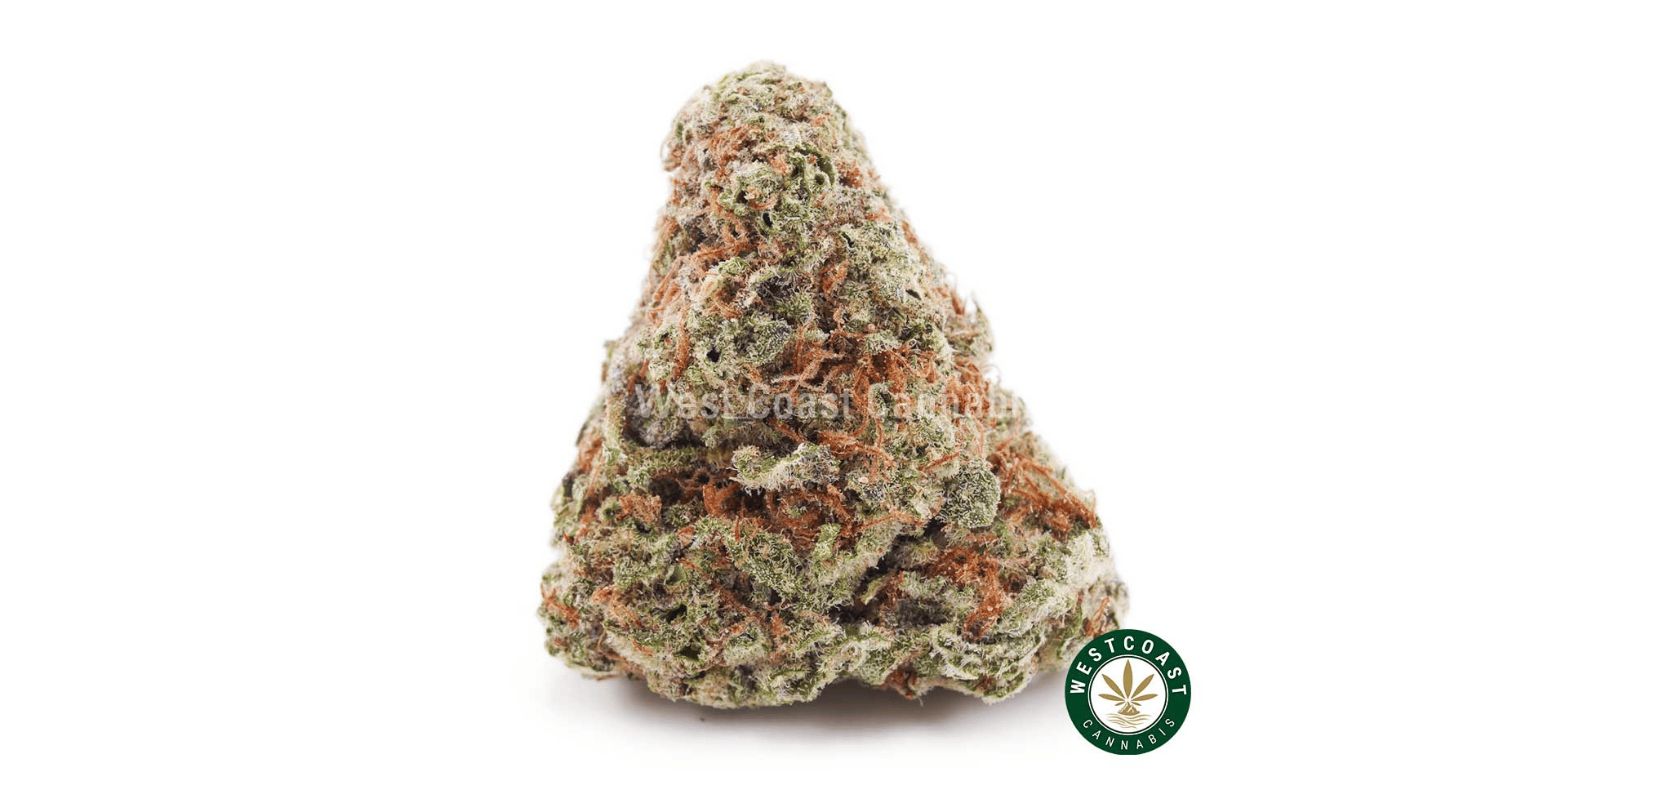 Buy Canadian weed online and save money with the best deals on Strawberry Cough AAAA for just $8.00.